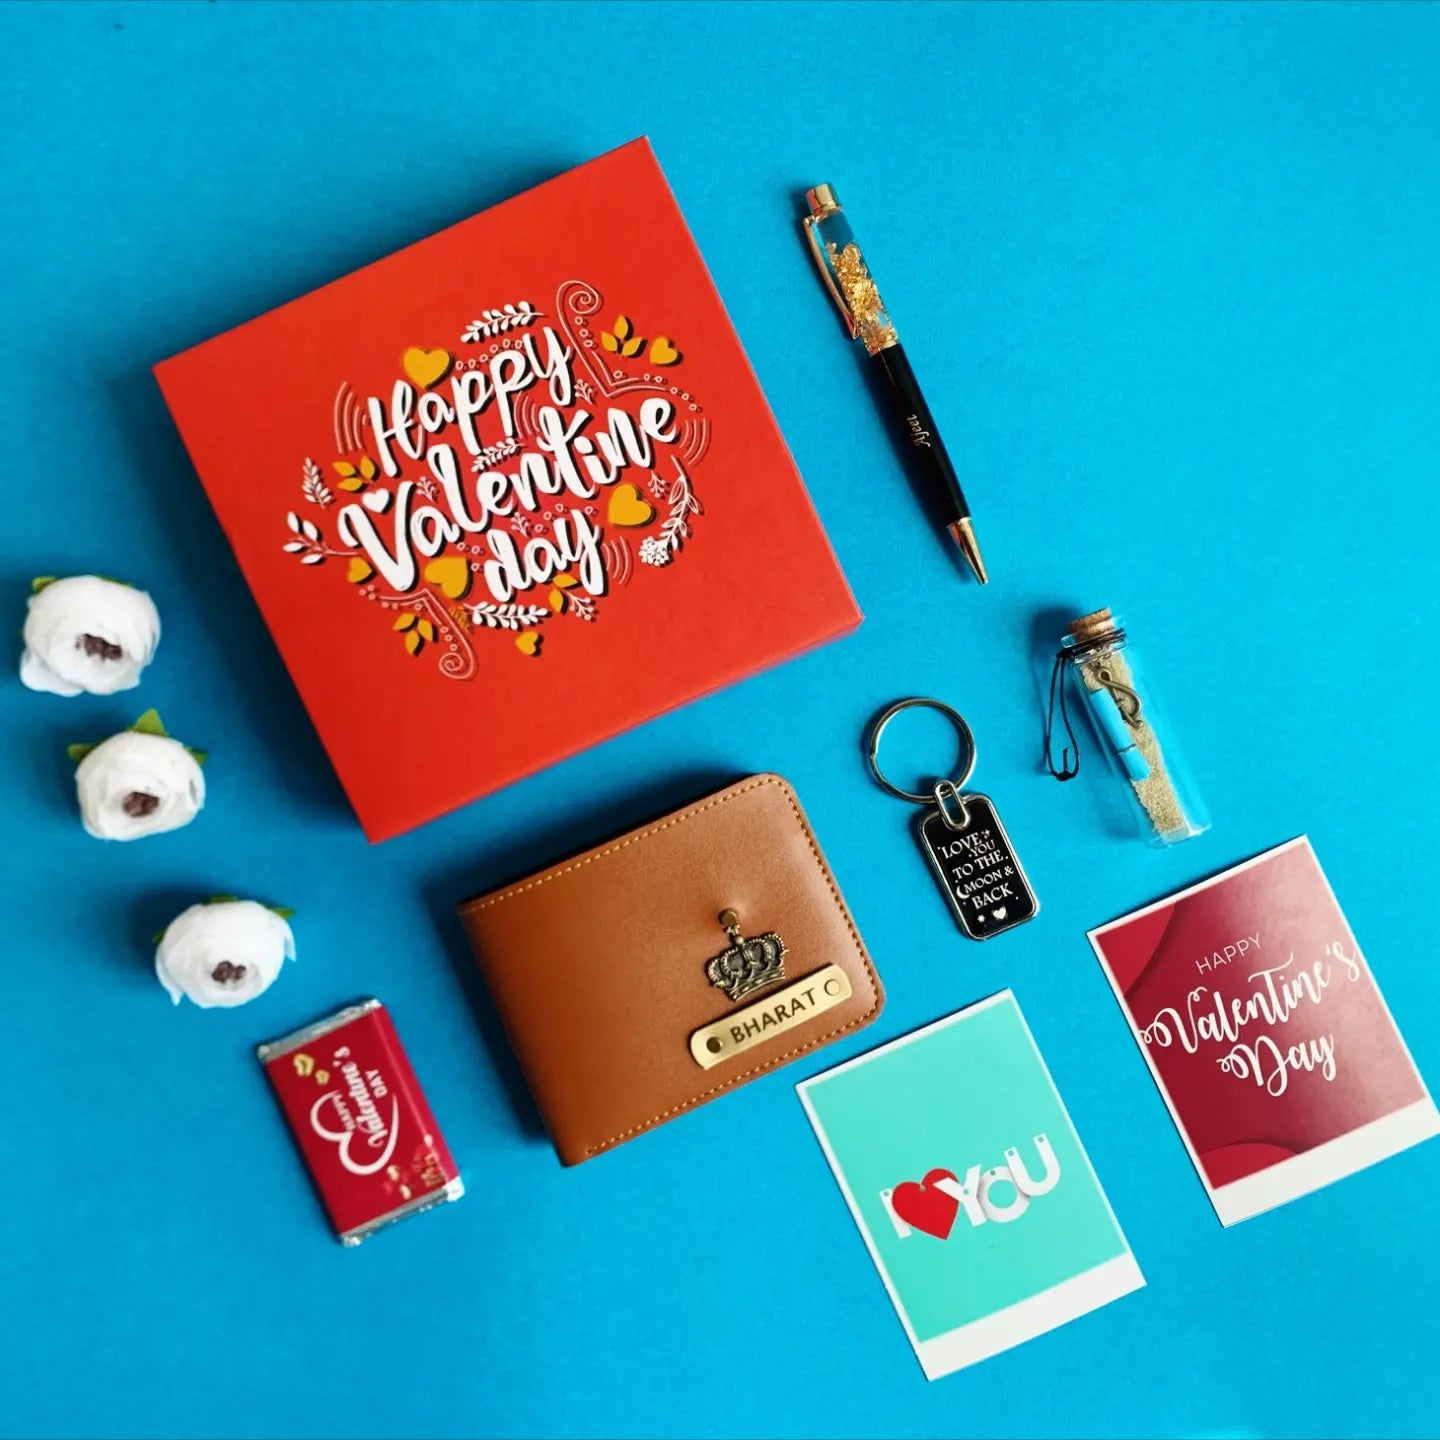 16 Top Christian Valentine Gifts for Husband (He'll Love these ideas!) –  Christian Walls